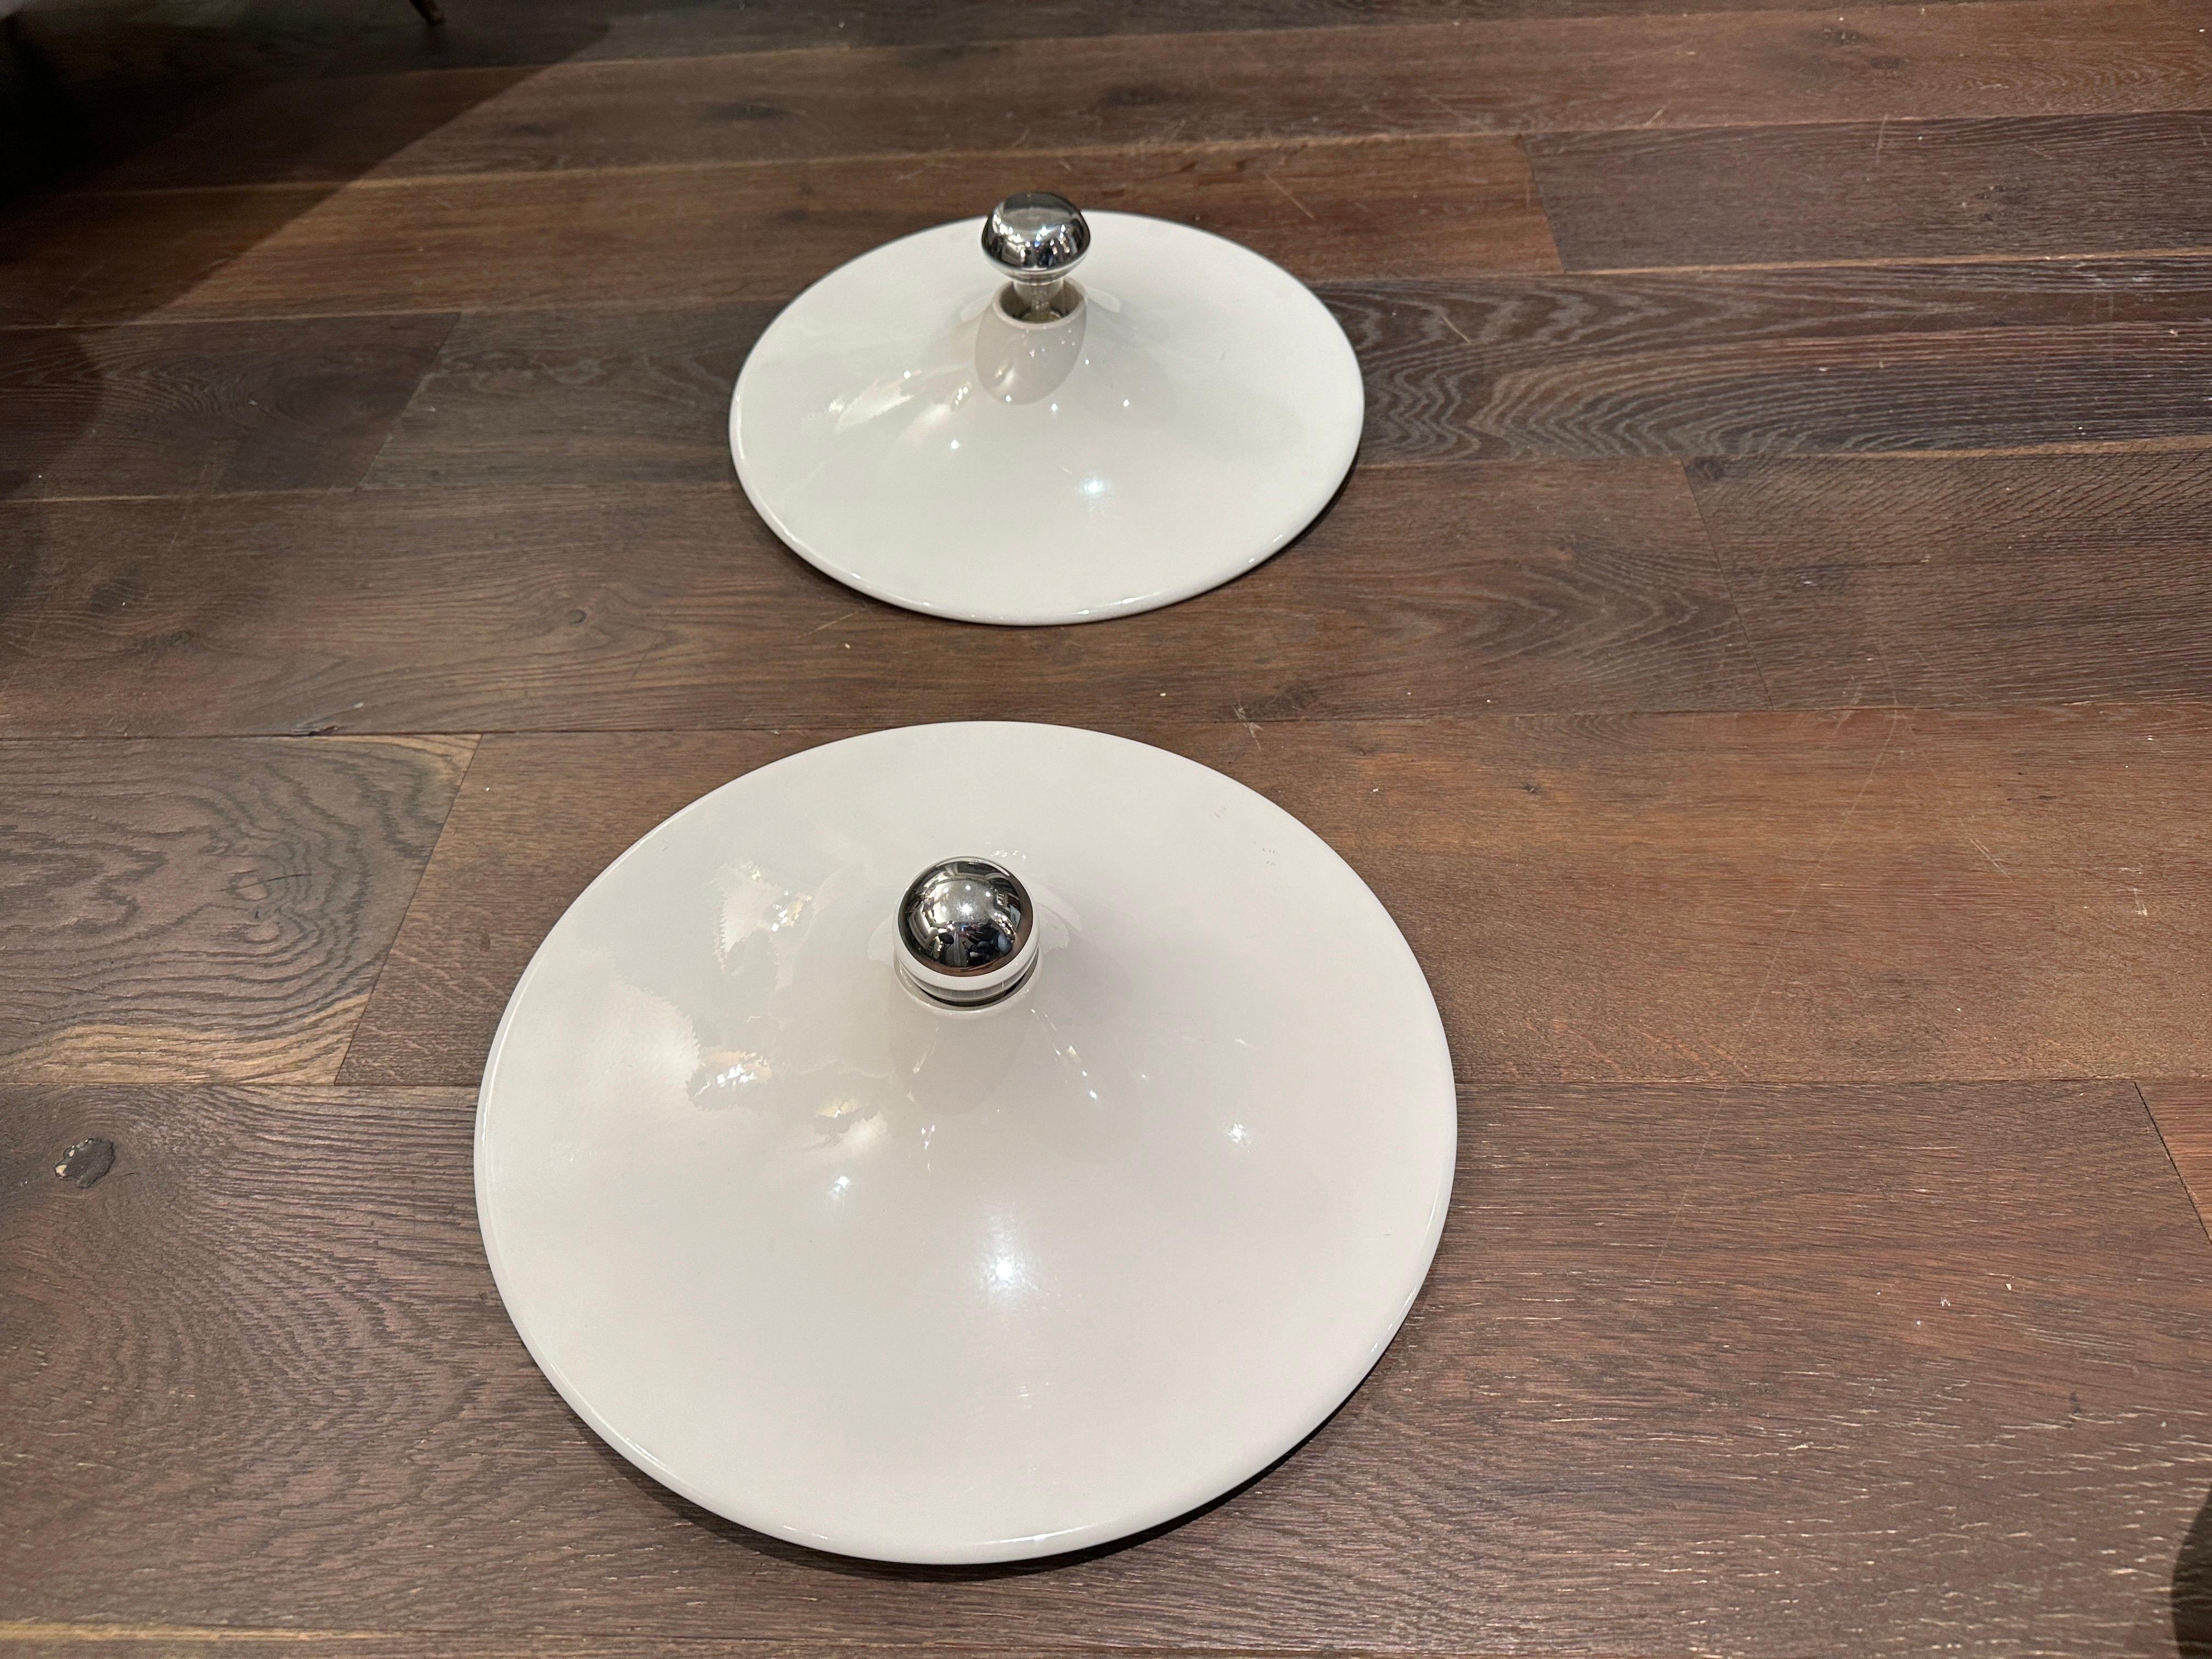 A  set of two disc wall lights, designed by Gianluigi Gorgoni. Manufactured by the Italian lighting company, Stilnovo in 1970's. The lights are made of an off white coated metal. They can be used for both flush mount ceiling lights or wall